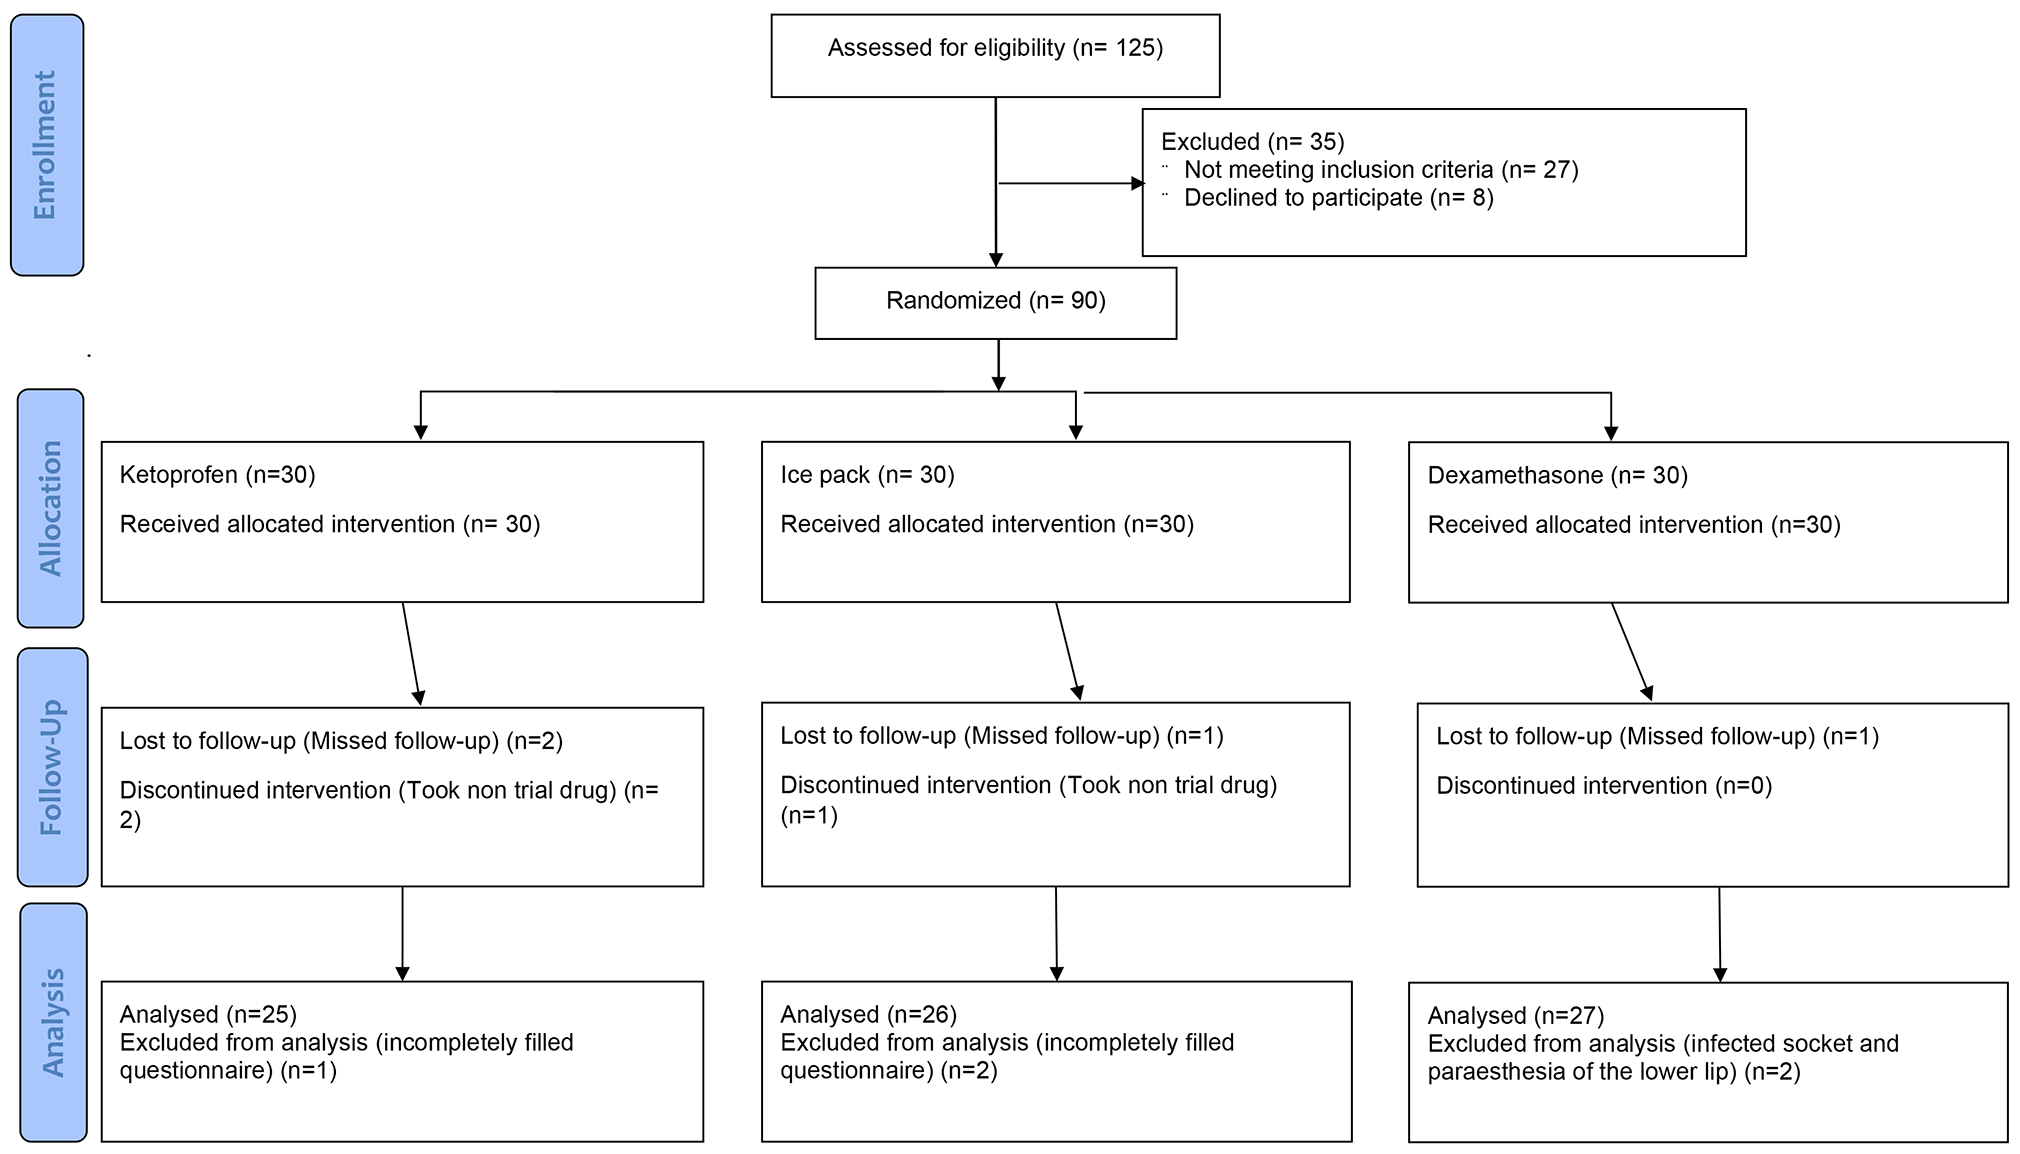 Comparison of the effect of dexamethasone, ketoprofen and cold compress on postoperative quality of life following impacted lower third molar surgery: a randomized clinical trial